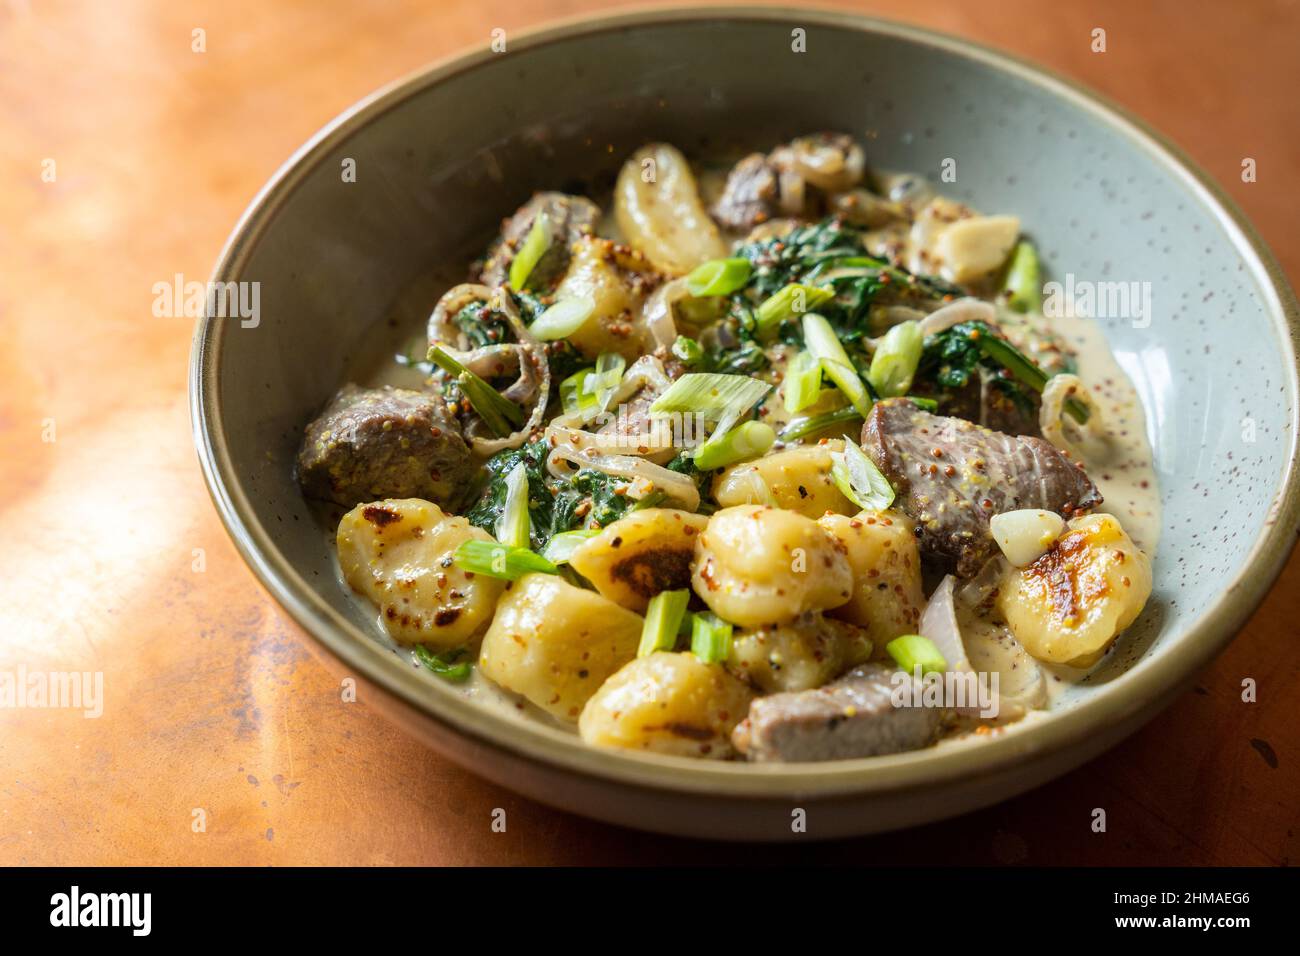 Gnocchi with steak and broccolini and green onions Stock Photo